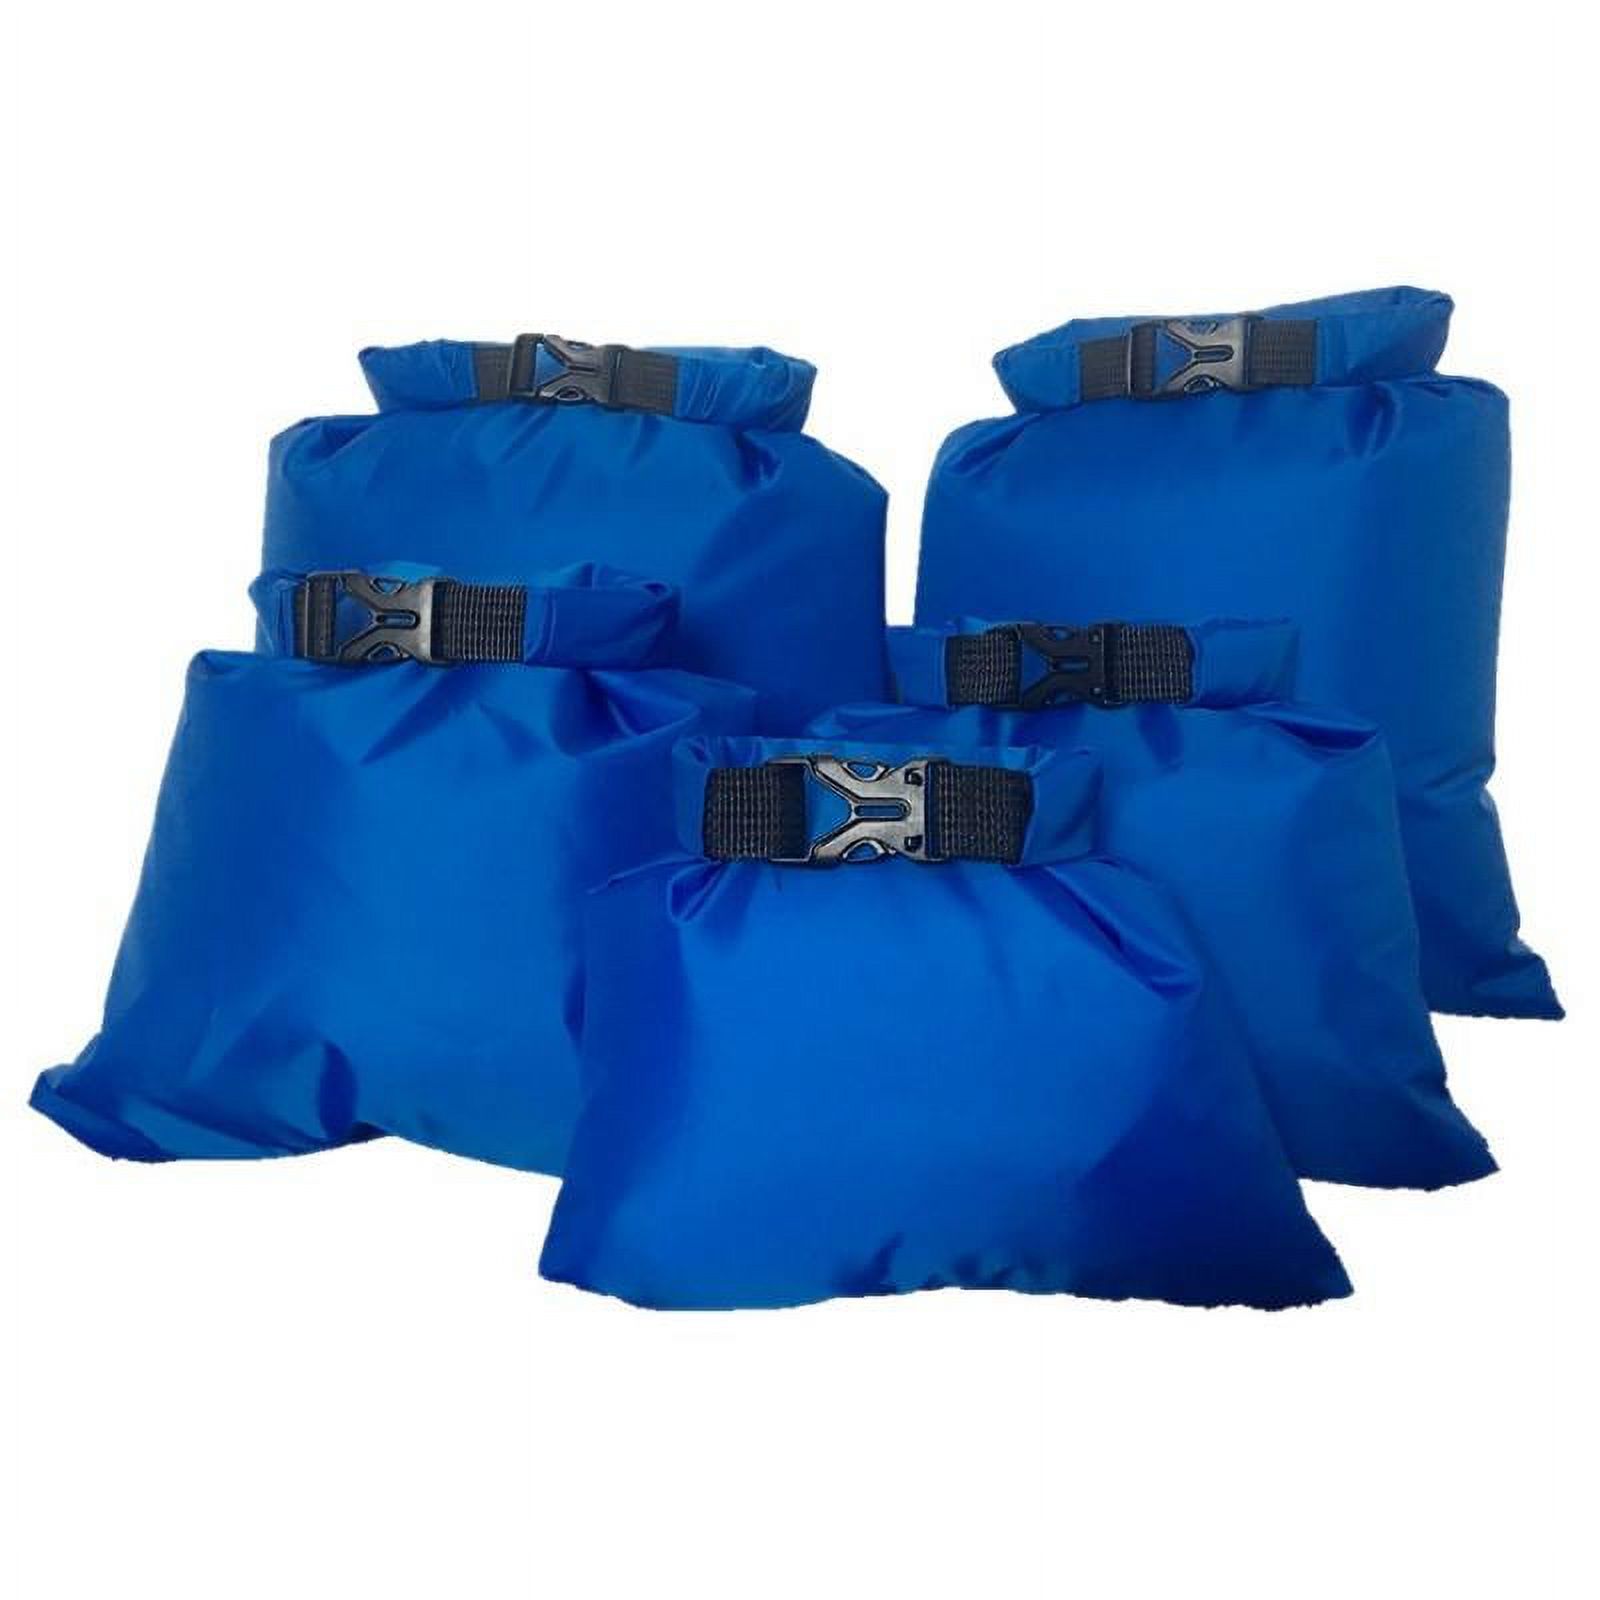 5Pcs/Set Waterproof Dry Bag, Roll Top Dry Compression Sack for Kayaking, Beach, Rafting, Boating, Hiking, Camping and Fishing - image 1 of 3